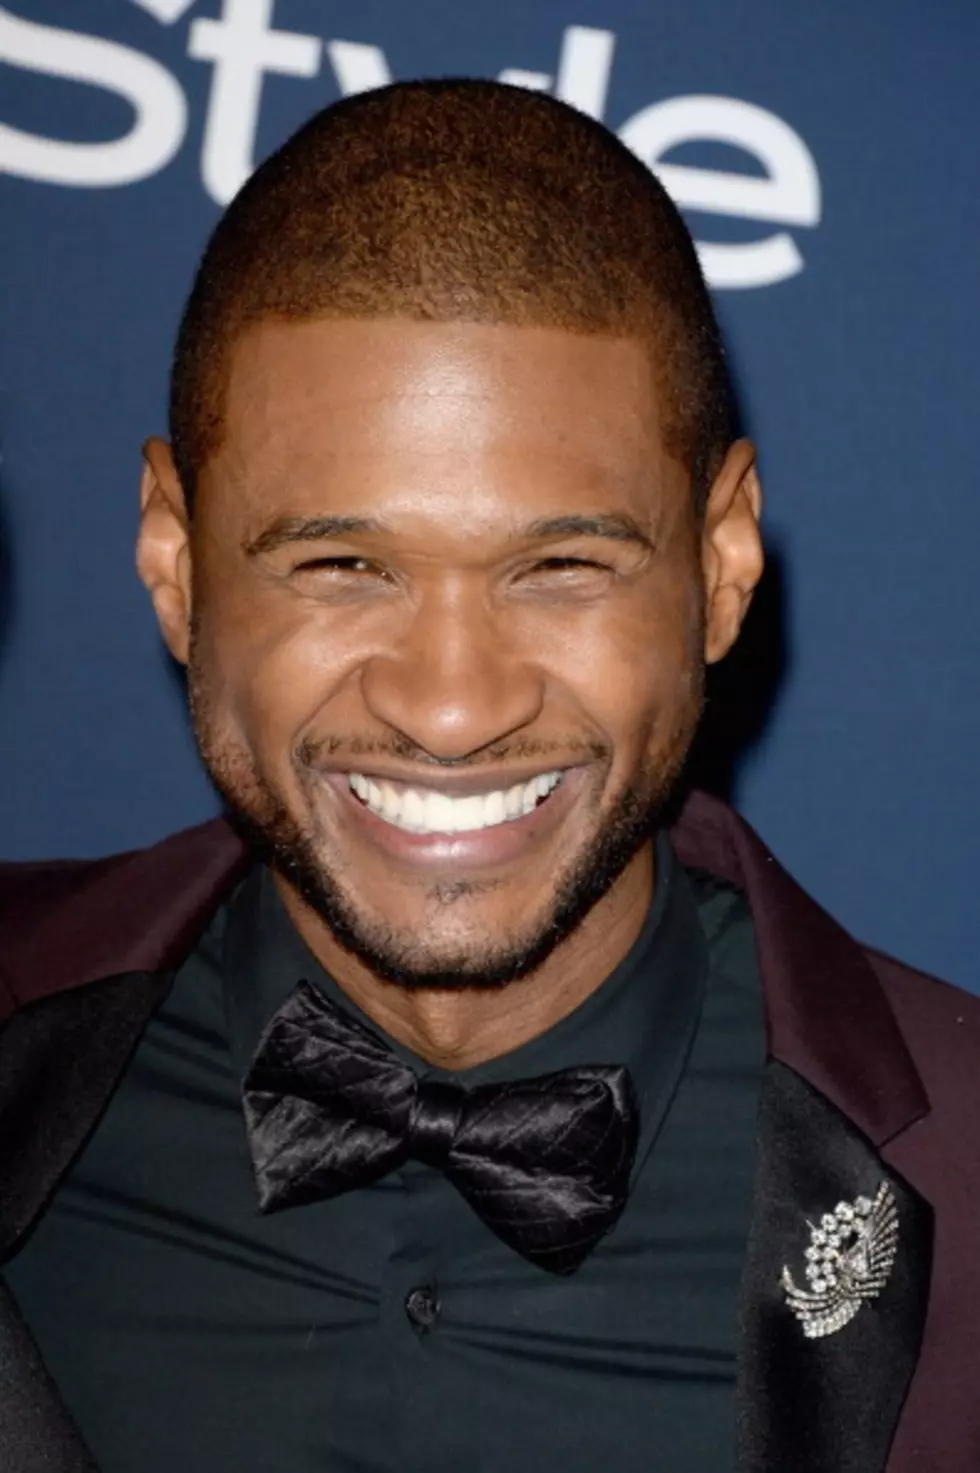 Usher & Nicki Minaj “She Came To Give it To You” Teaser: HOT After Dark with Linda Love